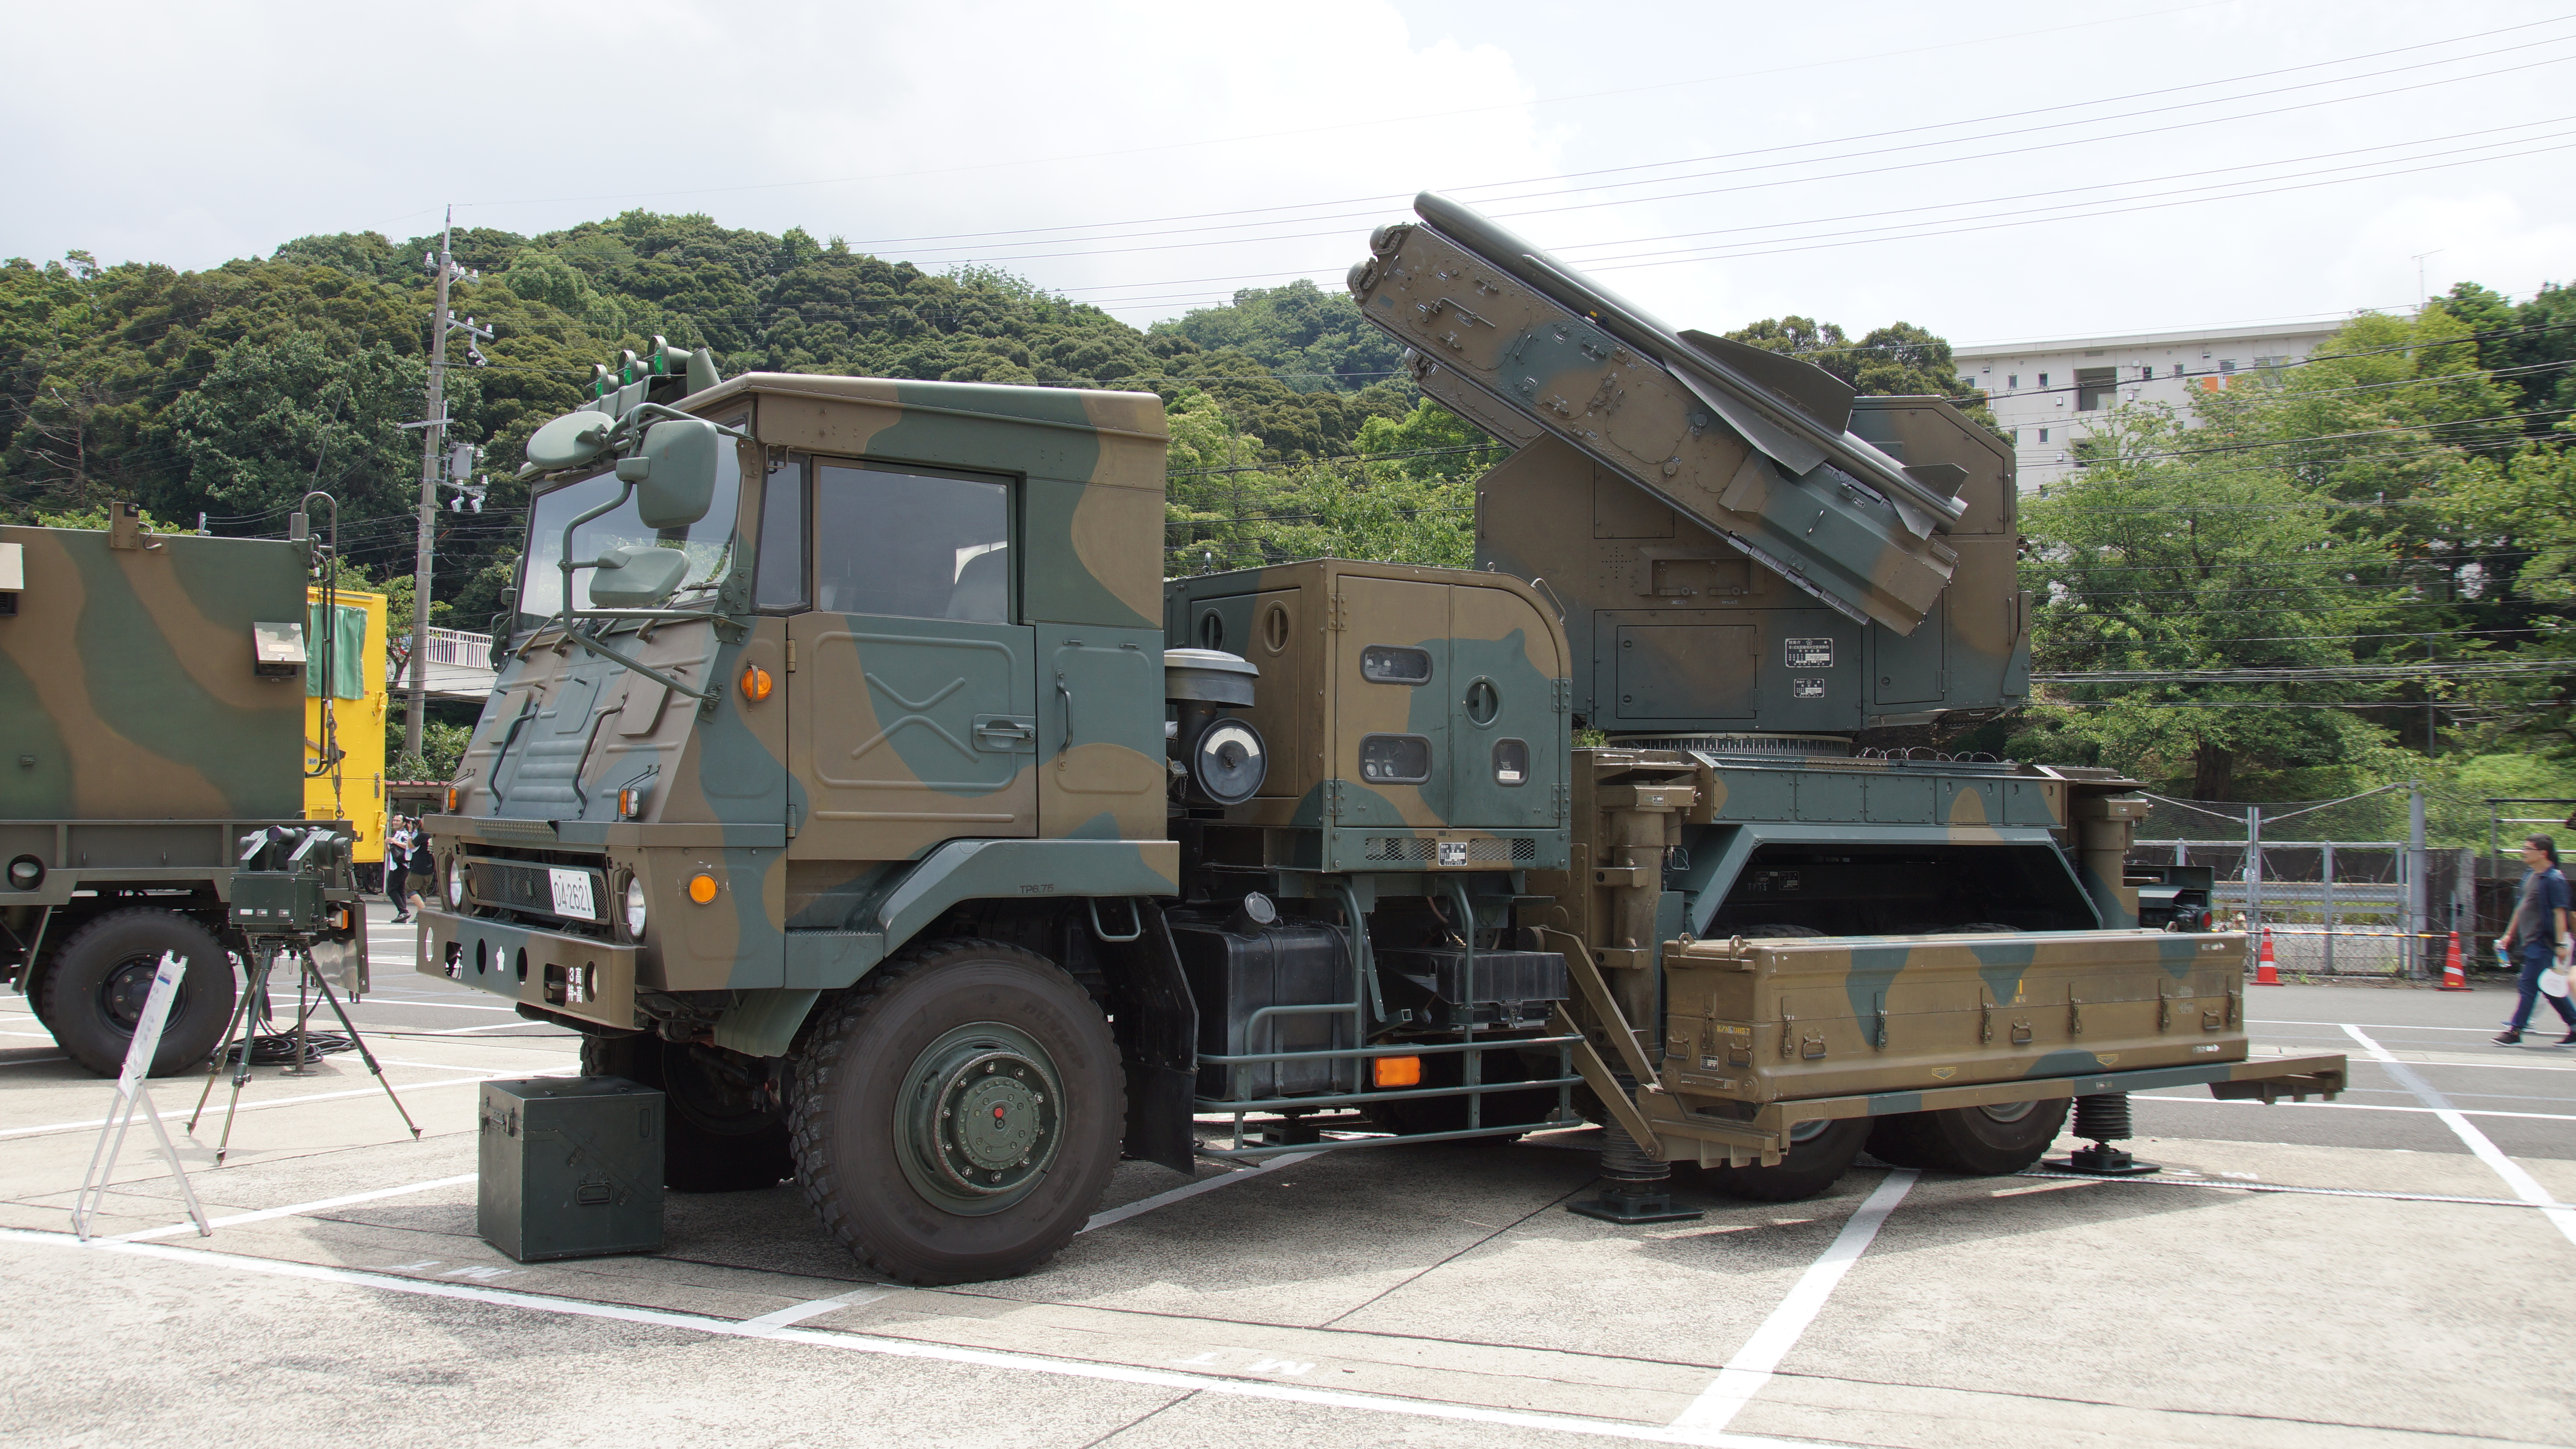 File:JGSDF Type 81 SAM(launcher, 04-2621) left front view at JMSDF 